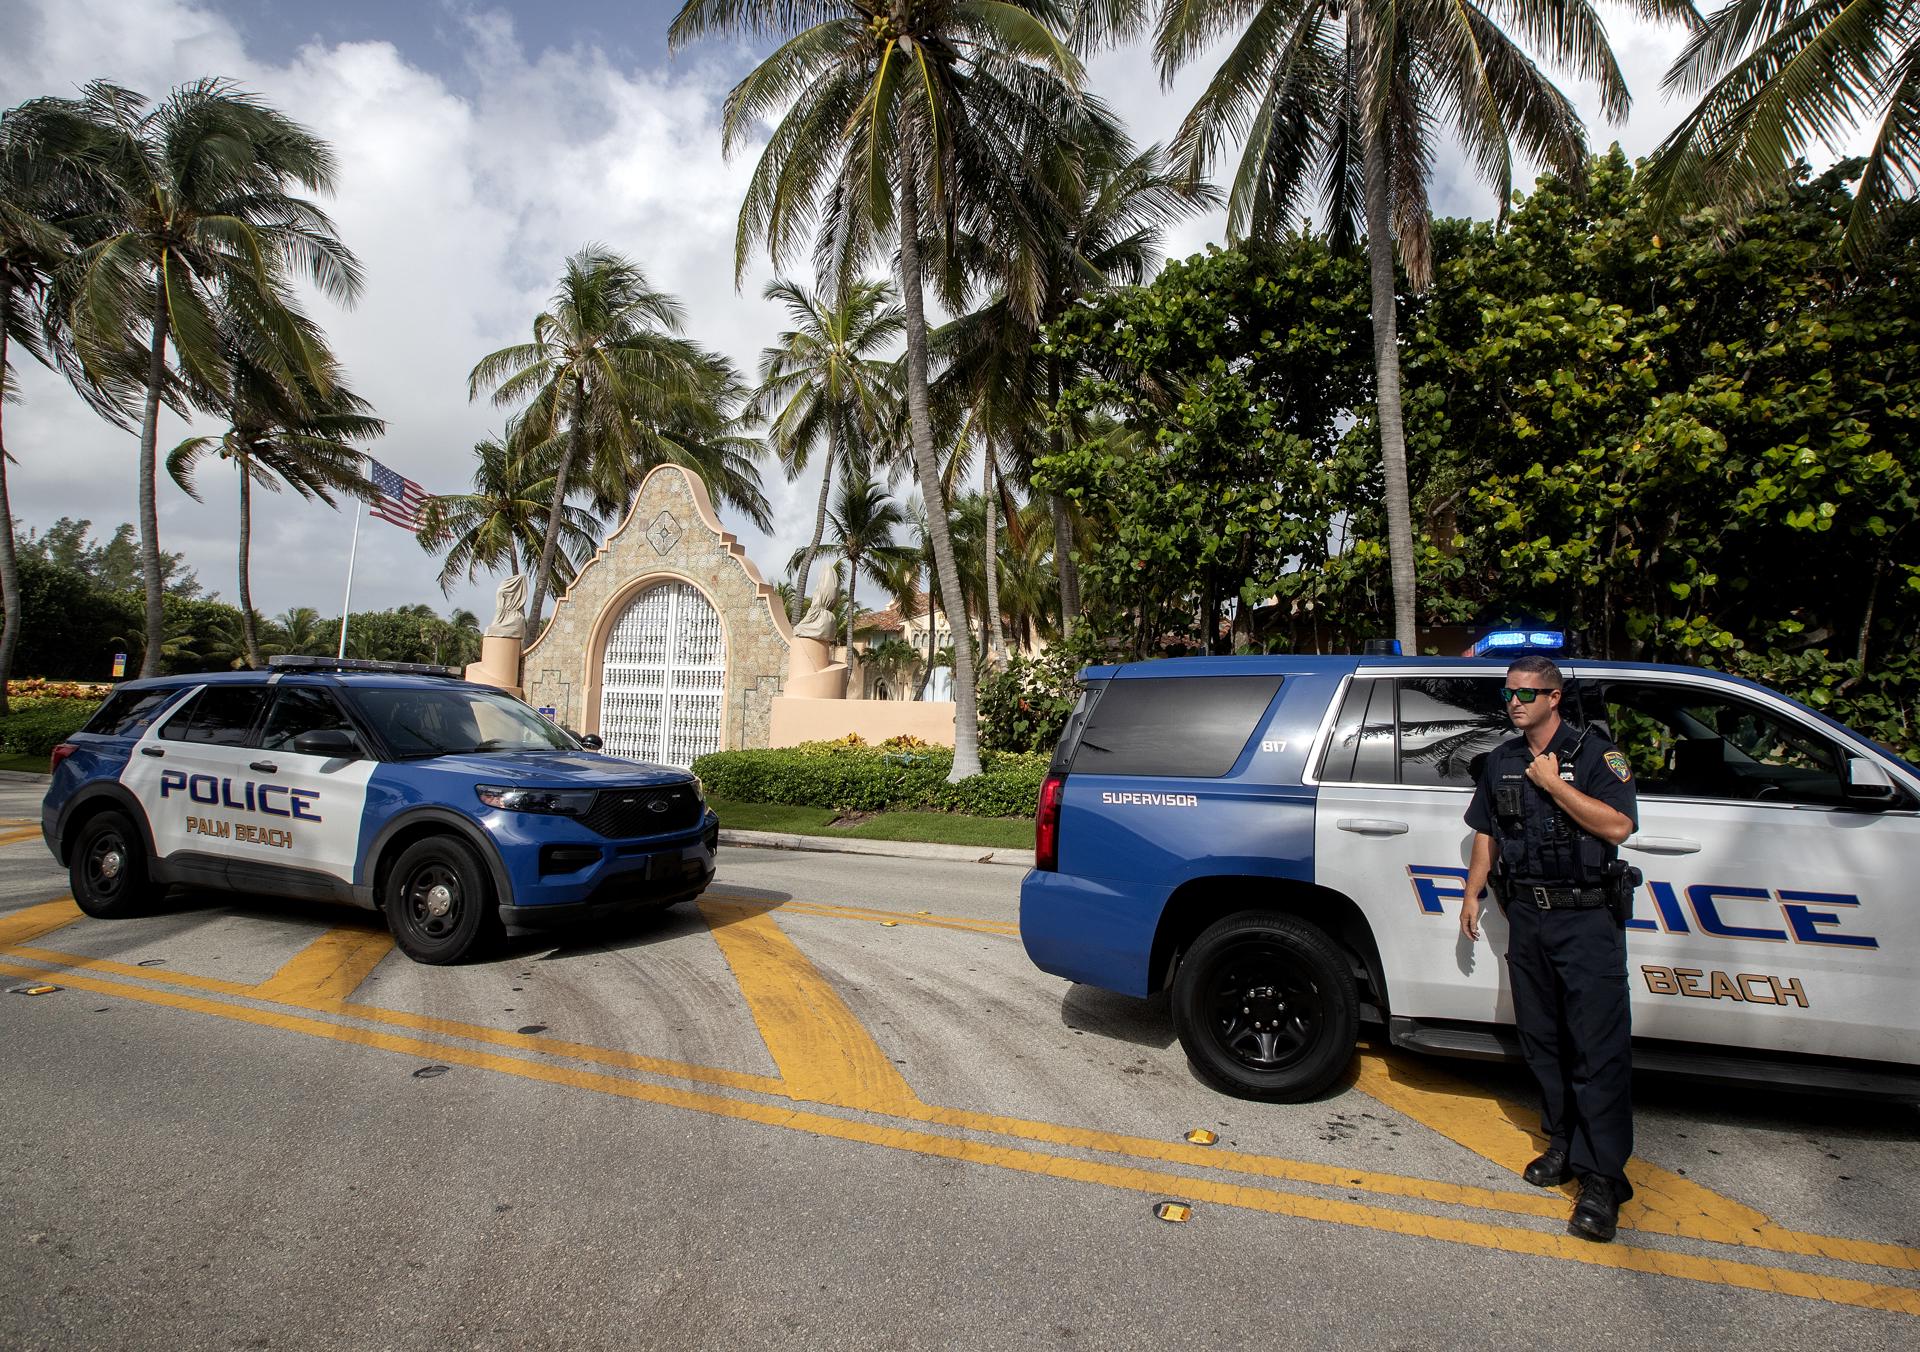 Authorities stand outside Mar-a-Lago, the residence of former president Donald Trump, amid reports of the FBI executing a search warrant as a part of a document investigation, in Palm Beach, Florida, USA, 09 August 2022. EFE-EPA FILE/CRISTOBAL HERRERA-ULASHKEVICH
